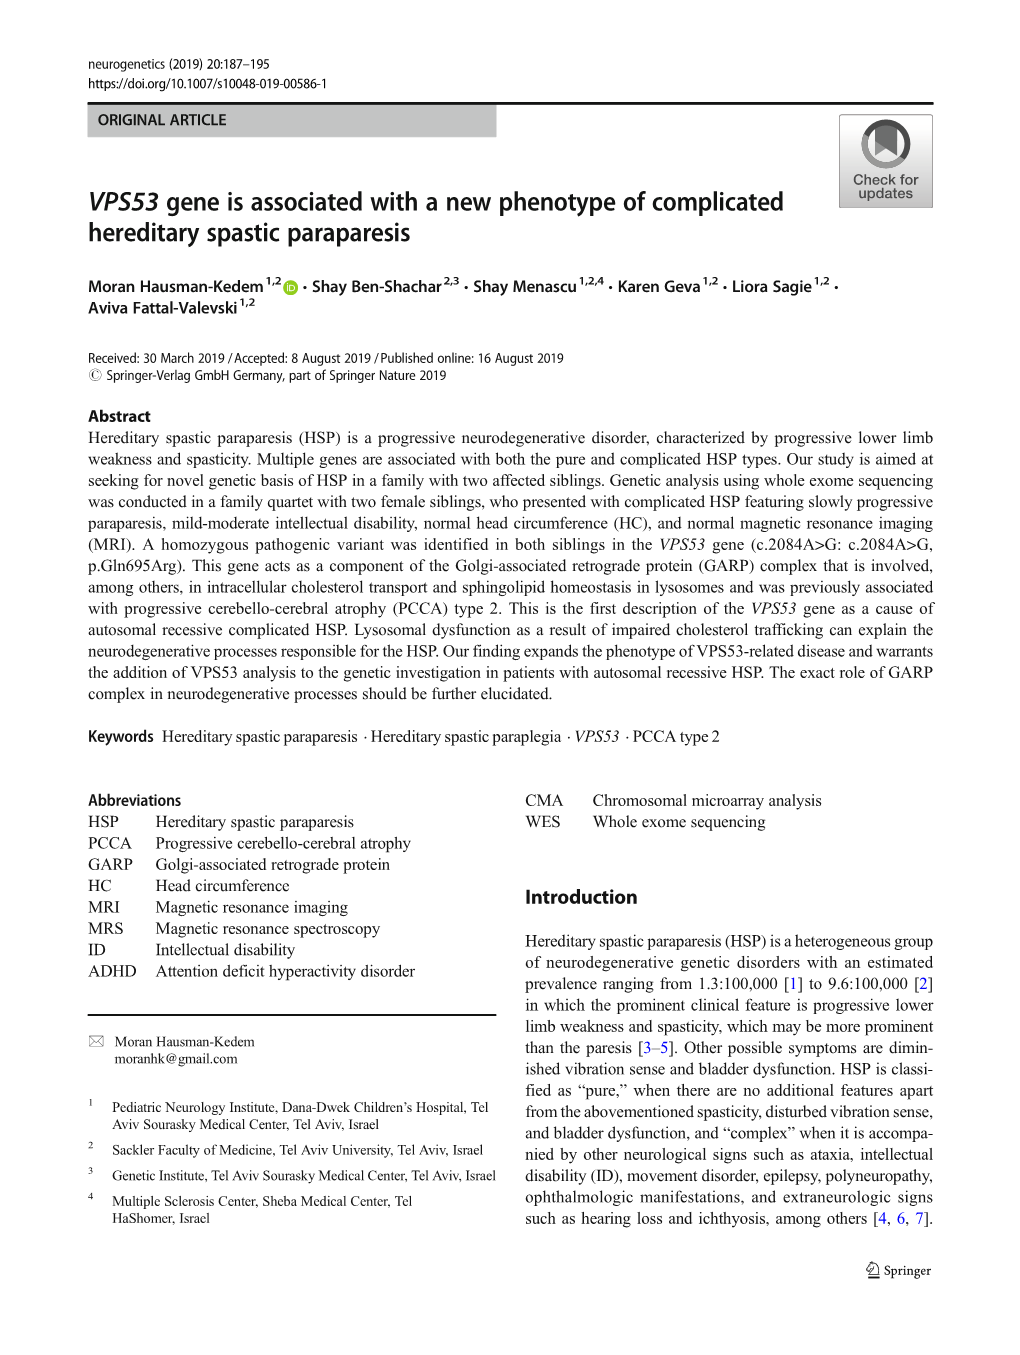 VPS53 Gene Is Associated with a New Phenotype of Complicated Hereditary Spastic Paraparesis